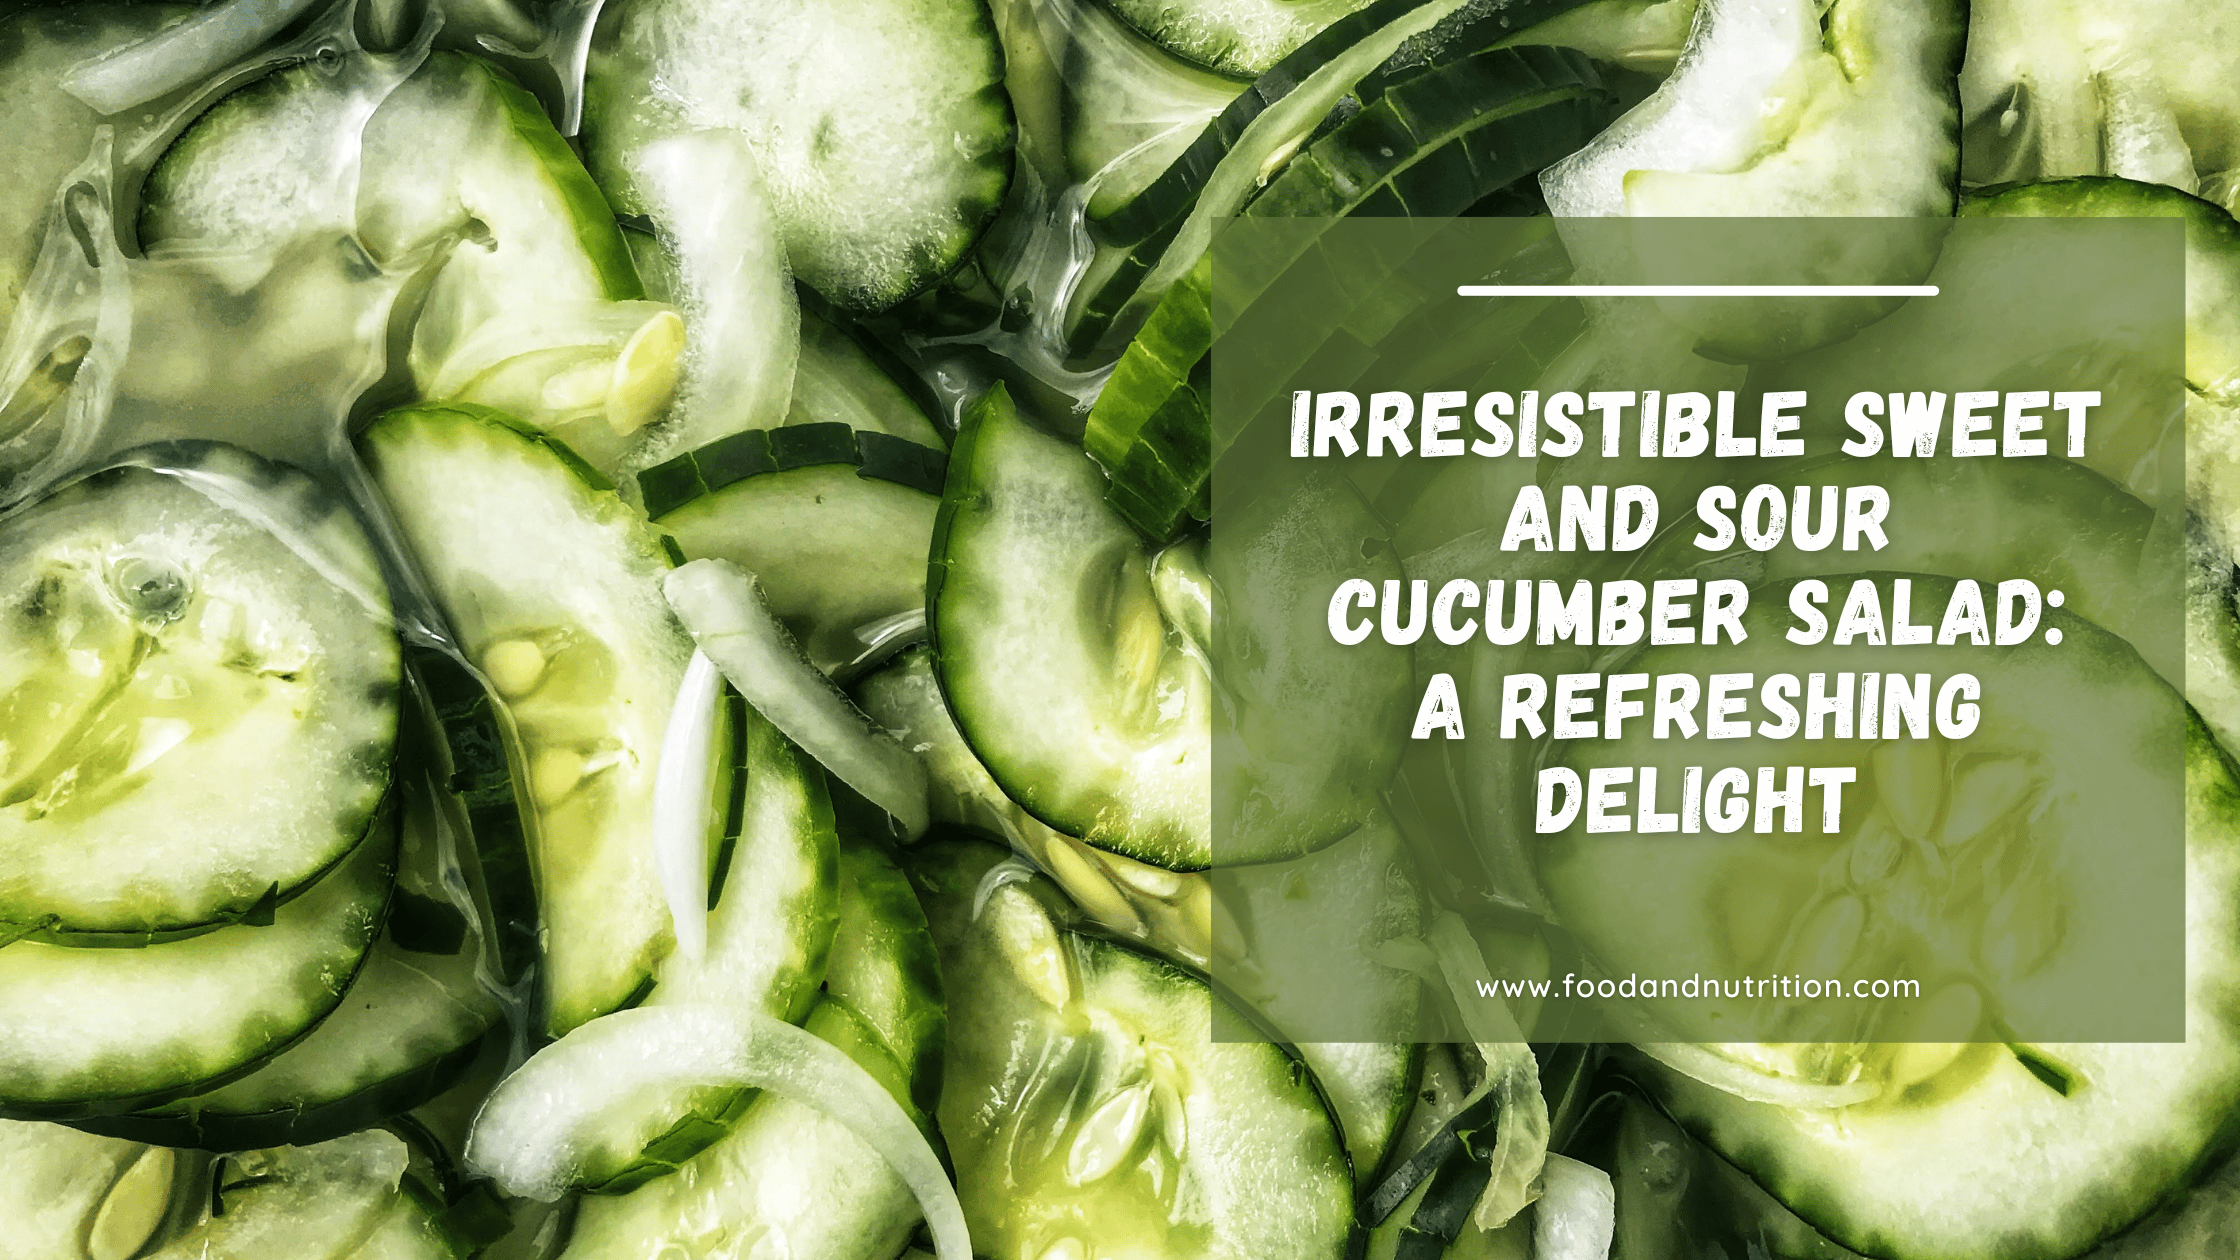 Irresistible Sweet and Sour Cucumber Salad: A Refreshing Delight